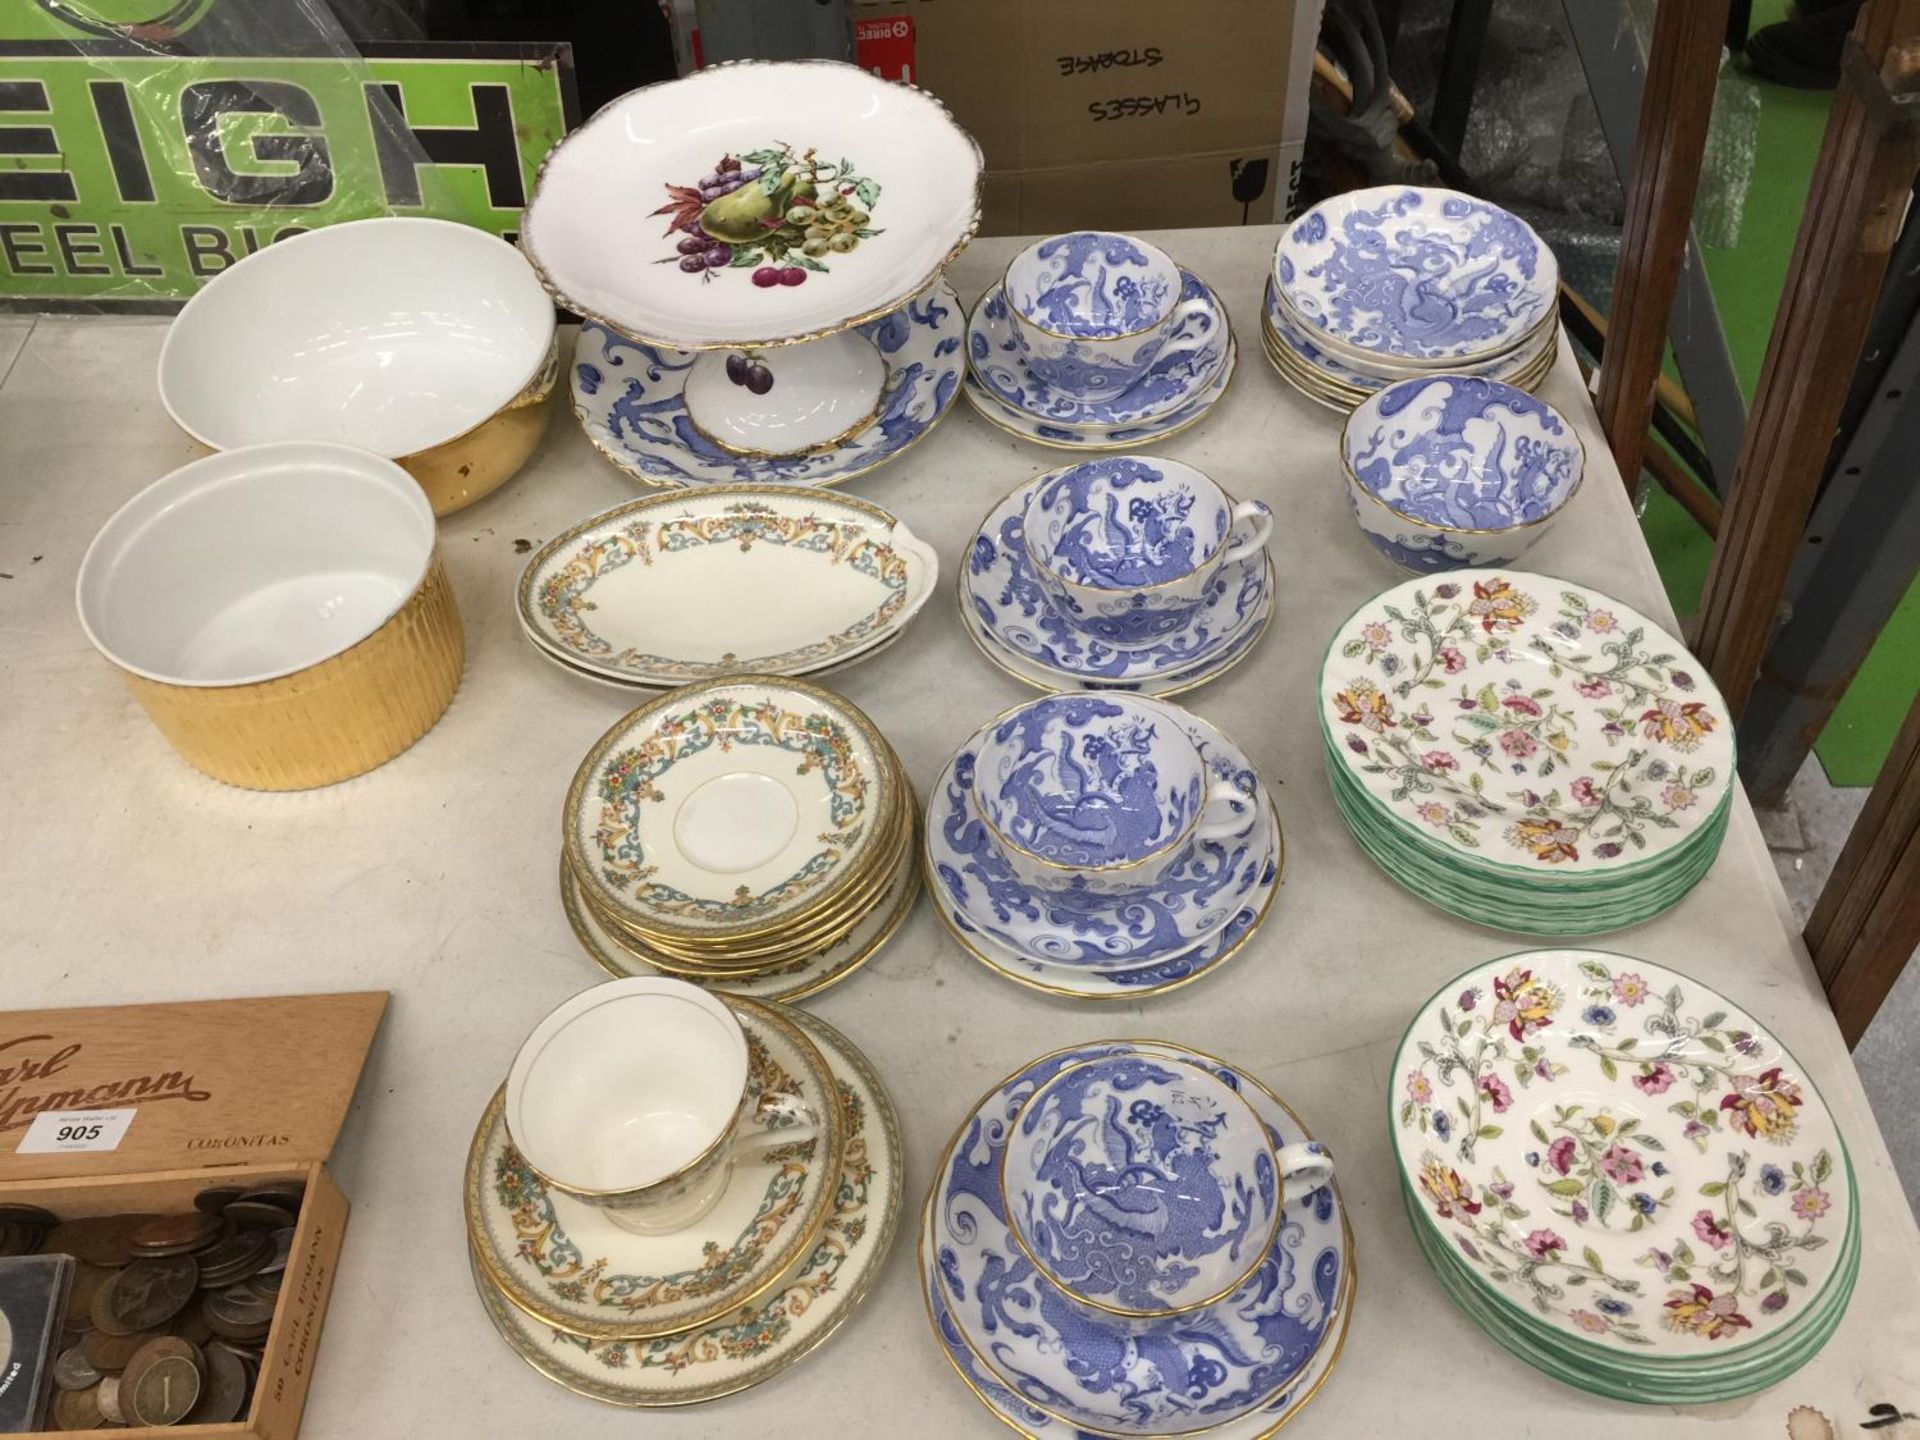 A QUANTITY OF ROYAL WORCESTER BLUE PATTERN TEACUPS, SAUCERS, PLATES, ETC, AYNSLEY 'HENLEY' PLATES